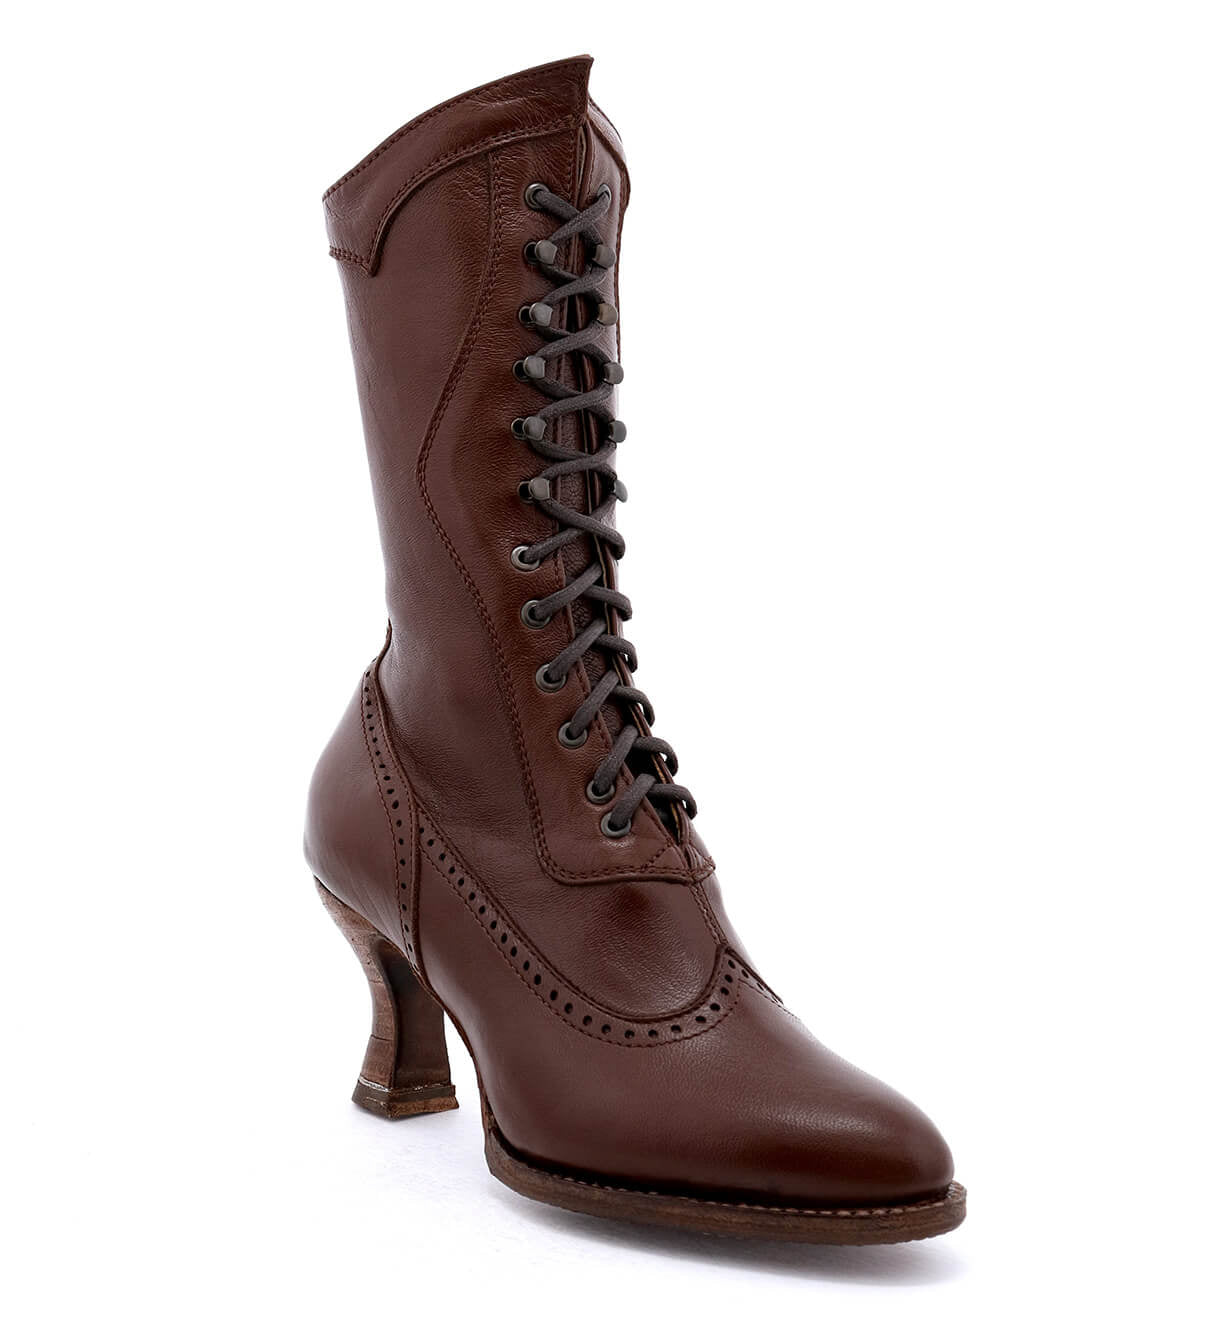 A women's handcrafted Oak Tree Farms Jasmine brown leather boot.